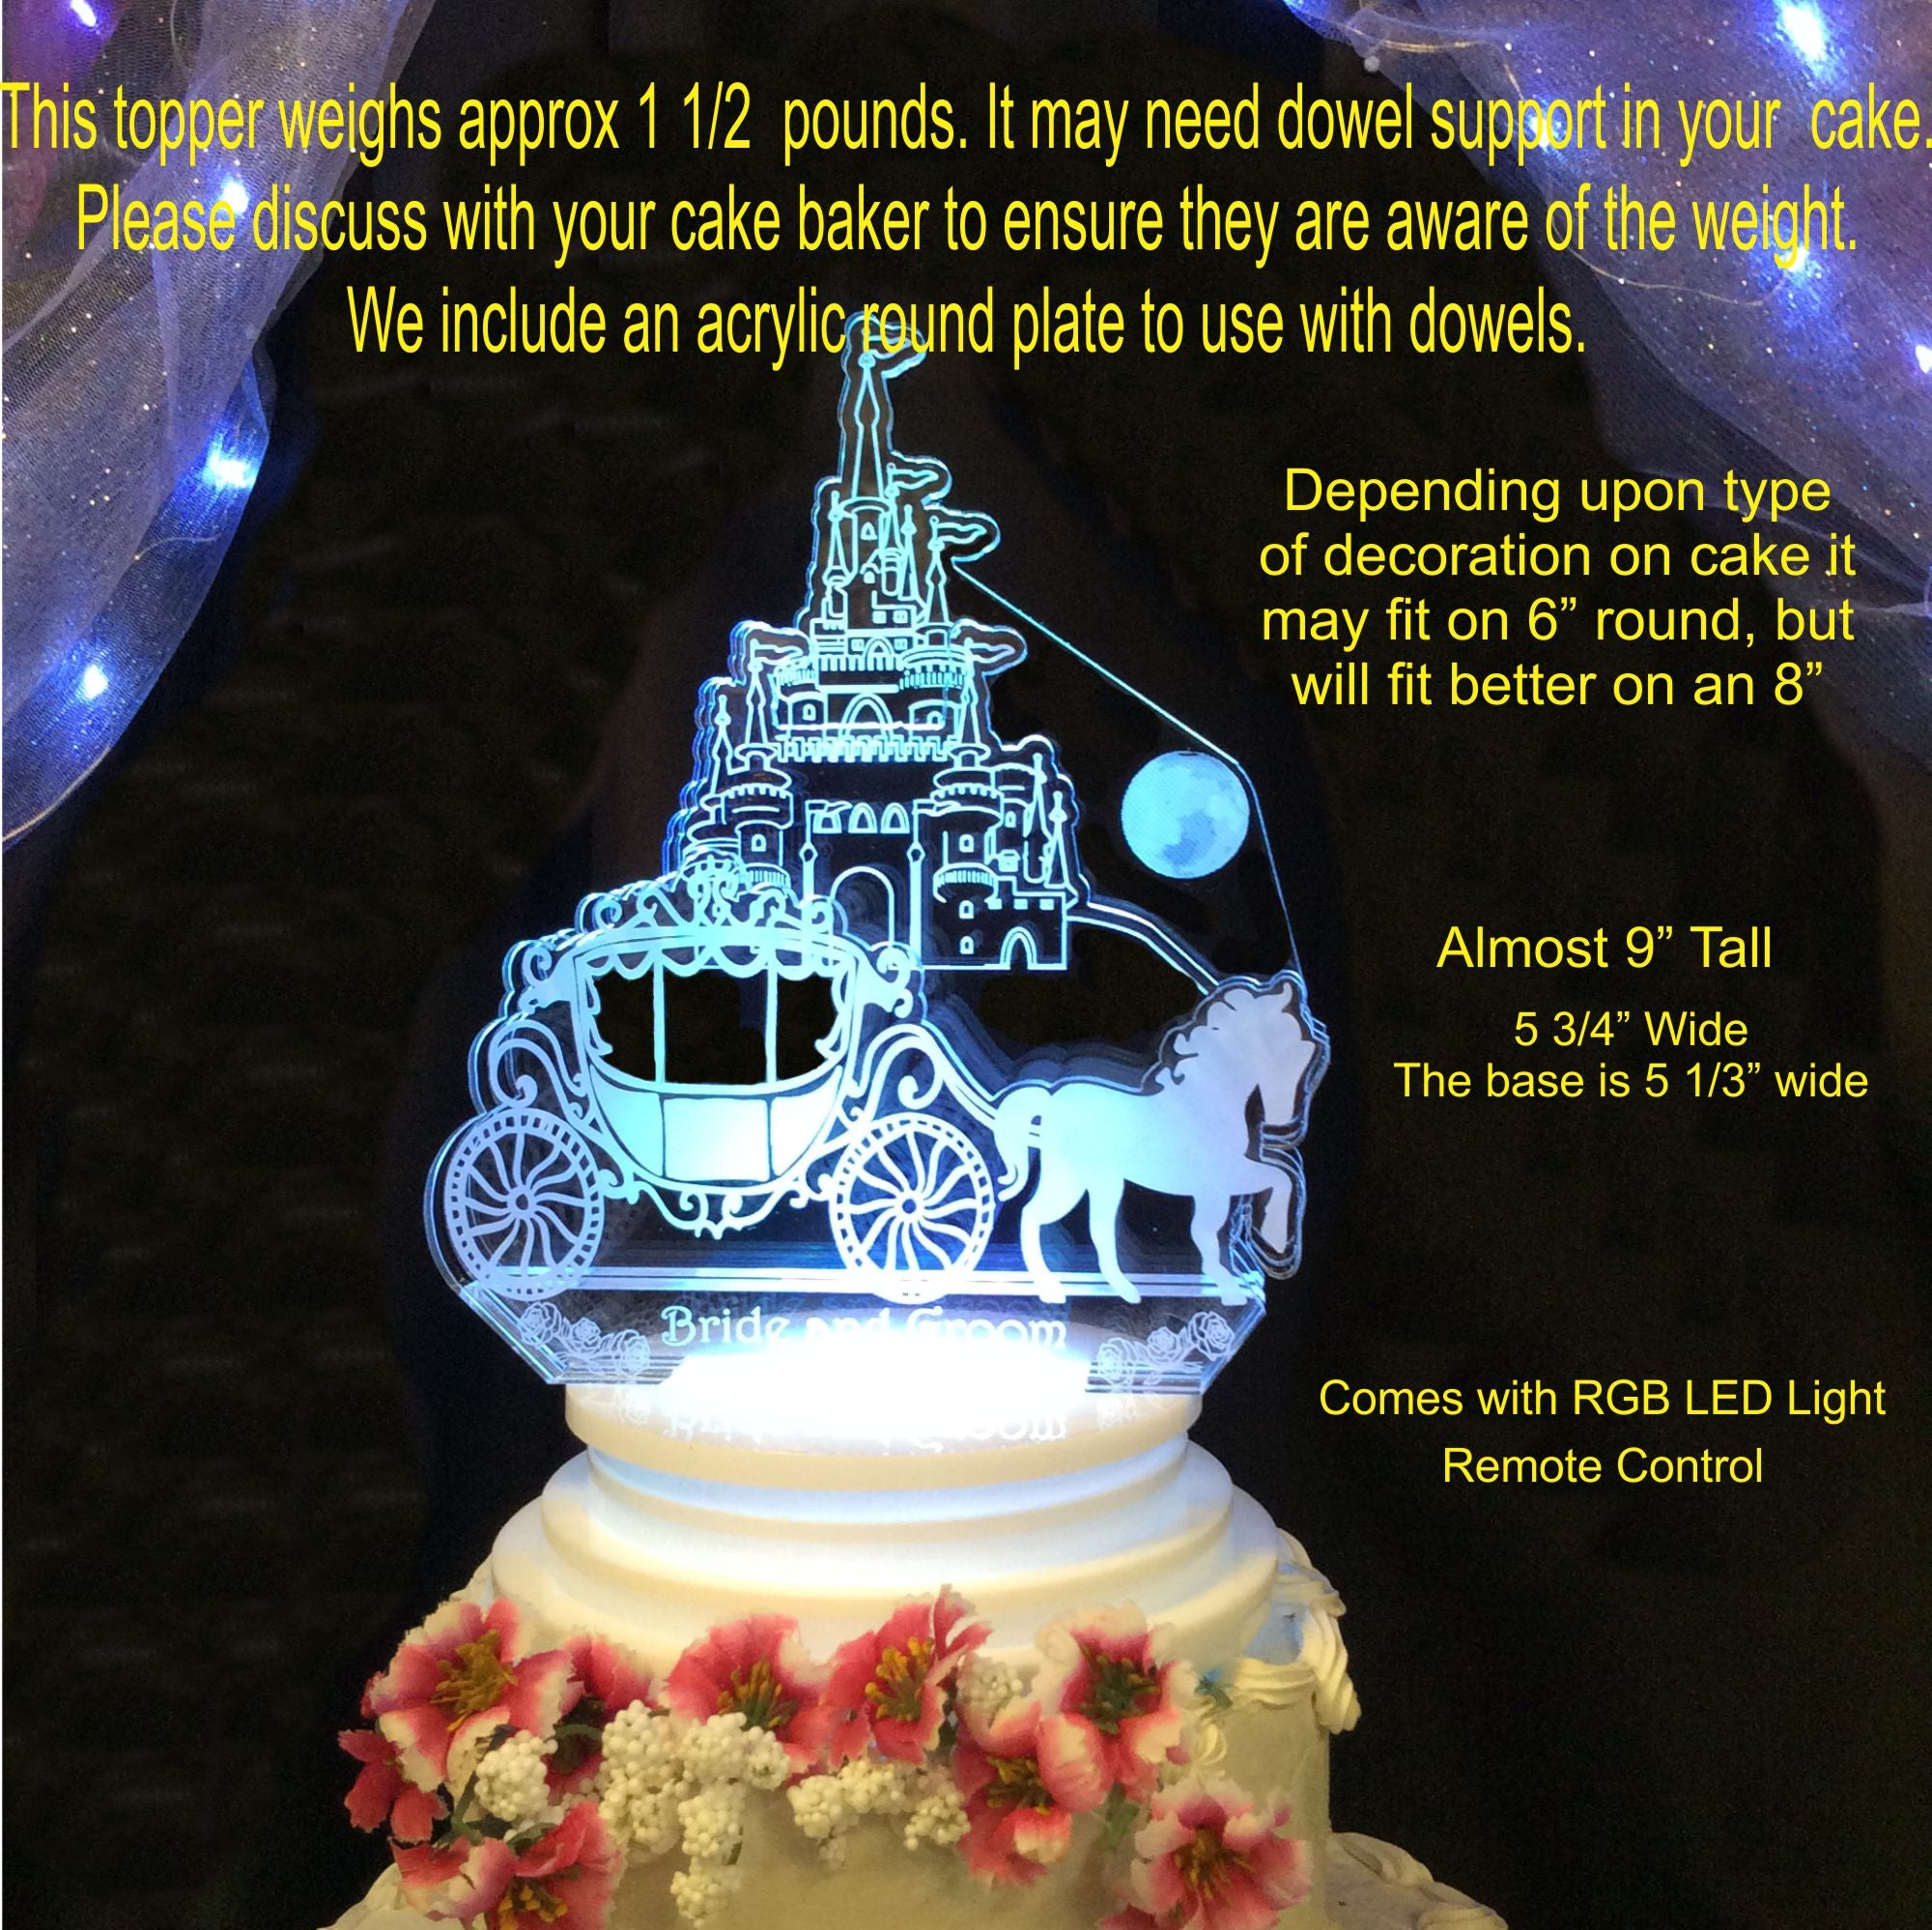 29 Disney Wedding Cakes & Cake Toppers for a Touch of Magic - hitched.co.uk